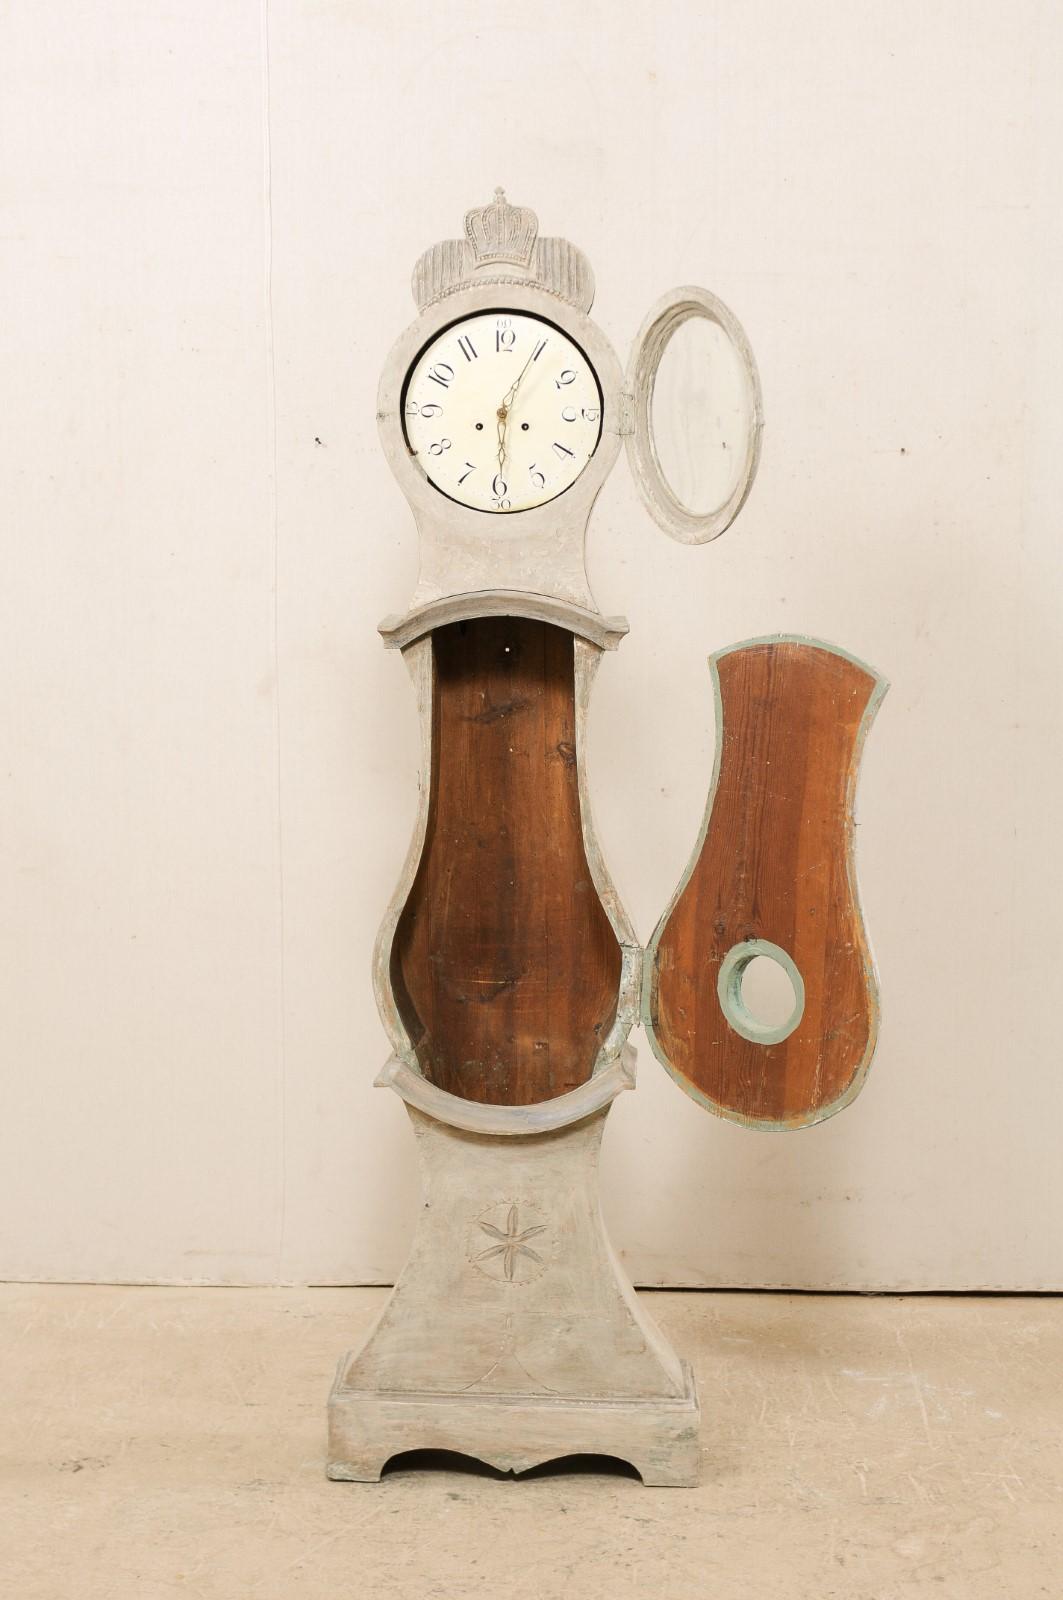 19th Century Central Swedish Floor Clock with Original Metal Face and Hands 1